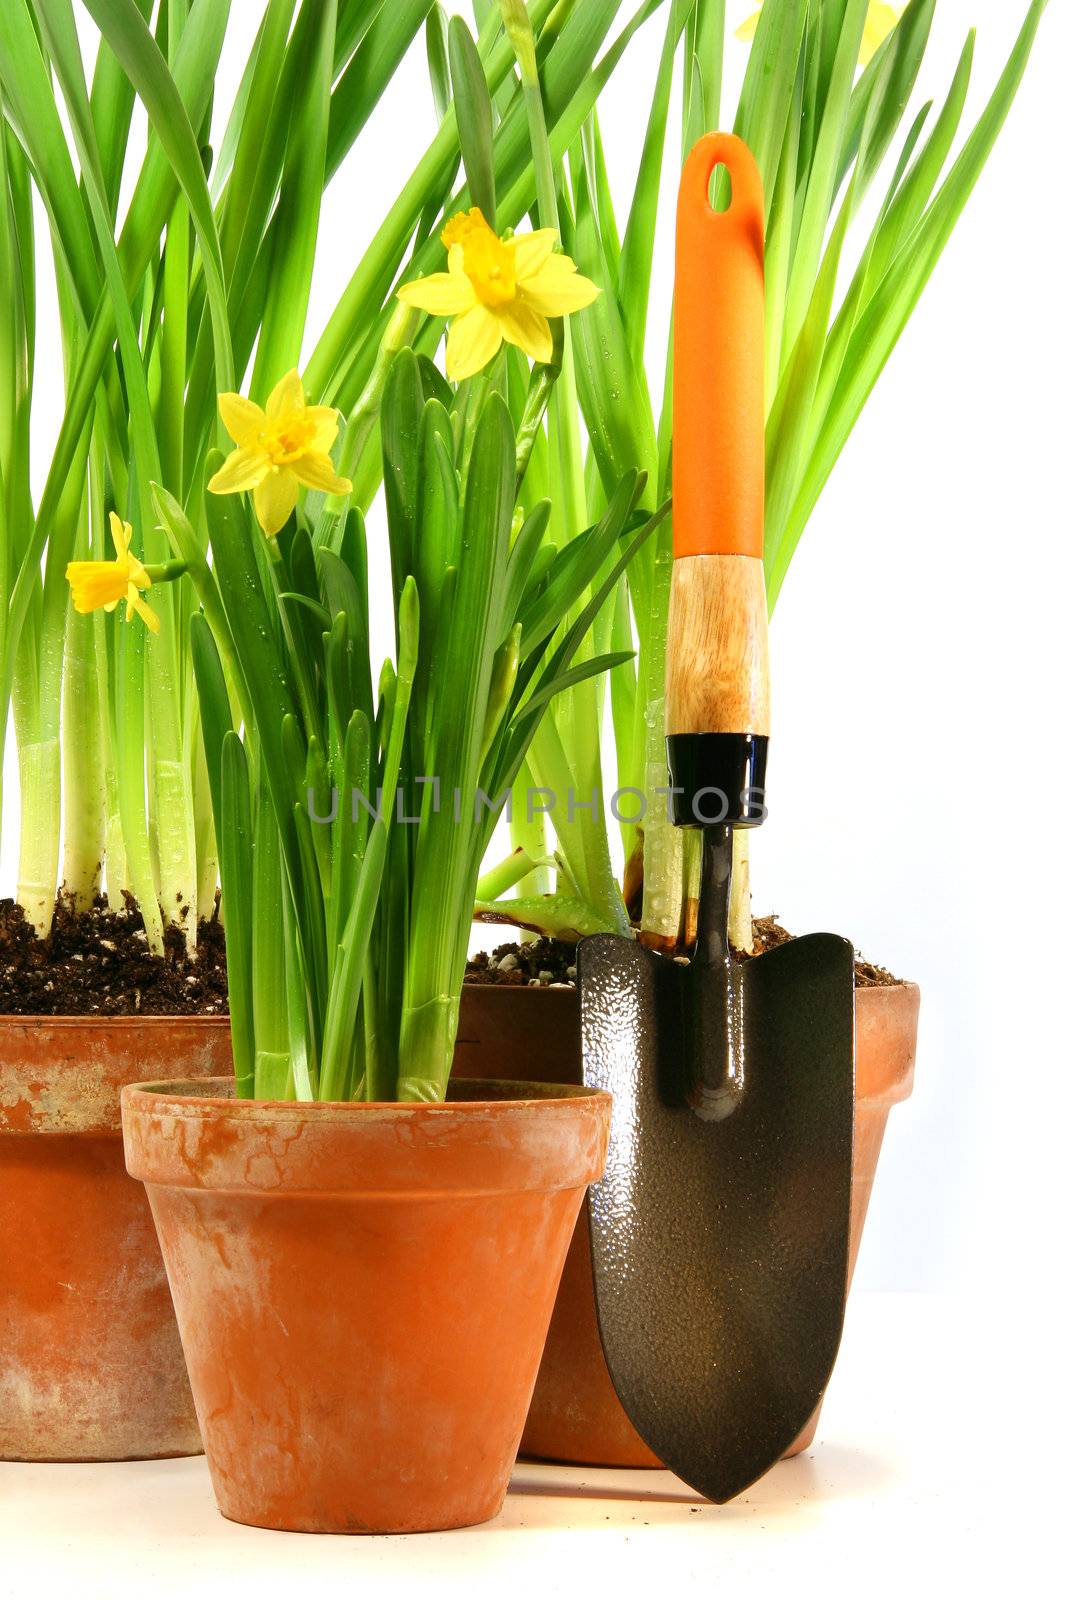 Pots of daffodils with garden shovel on white background